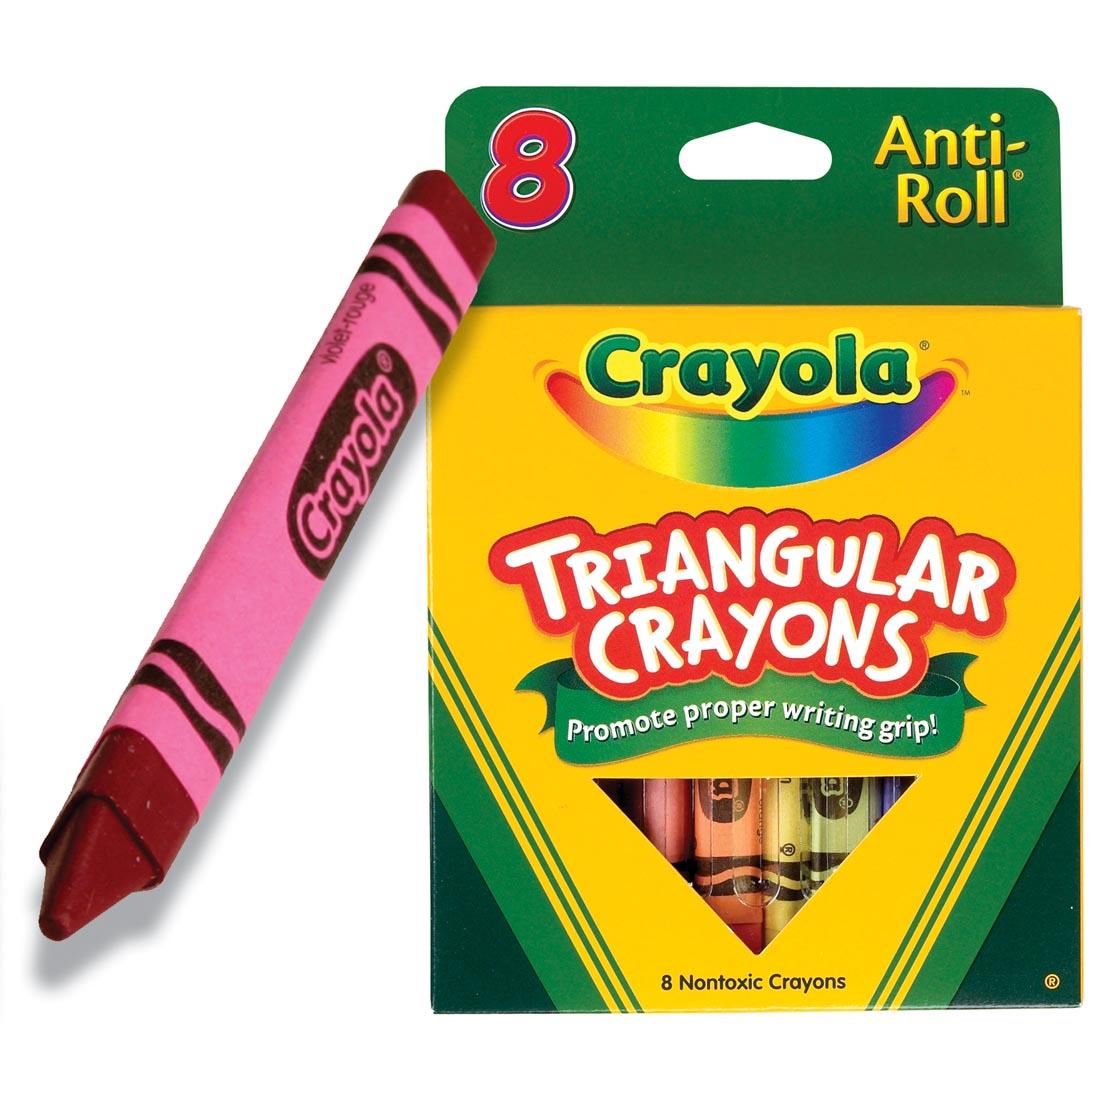 Red Anti-Roll Crayon beside the package of Crayola Triangular Crayons 8-Color Set